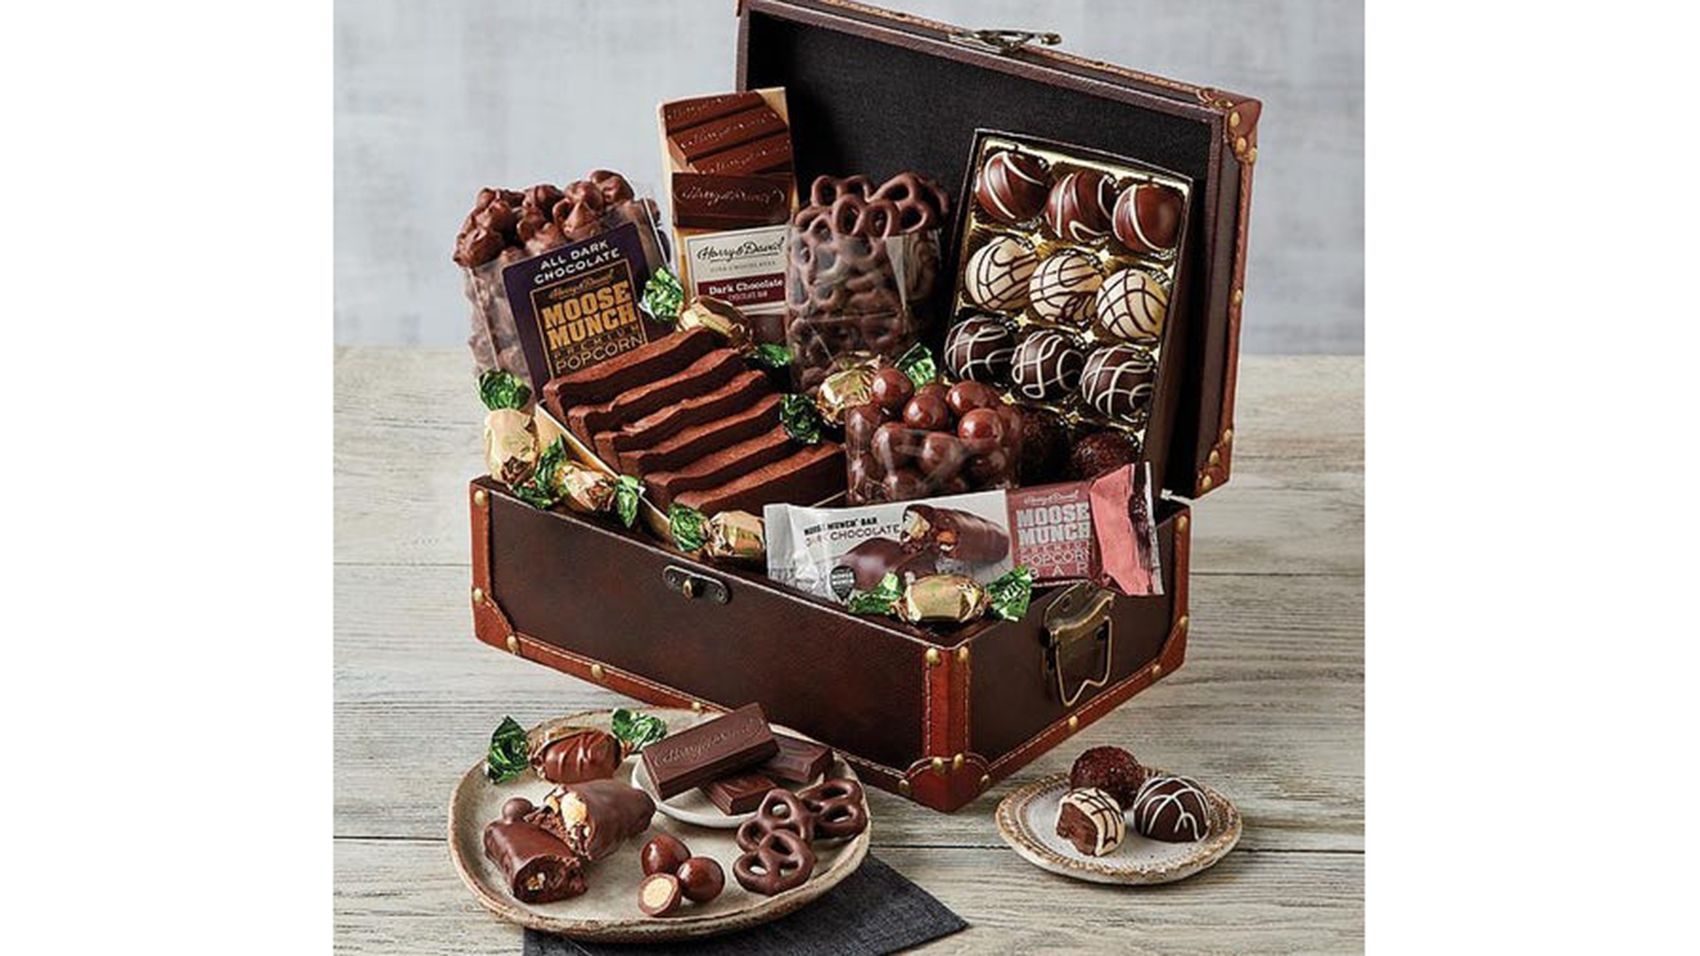 Having A Party Basket – Christopher Chocolates